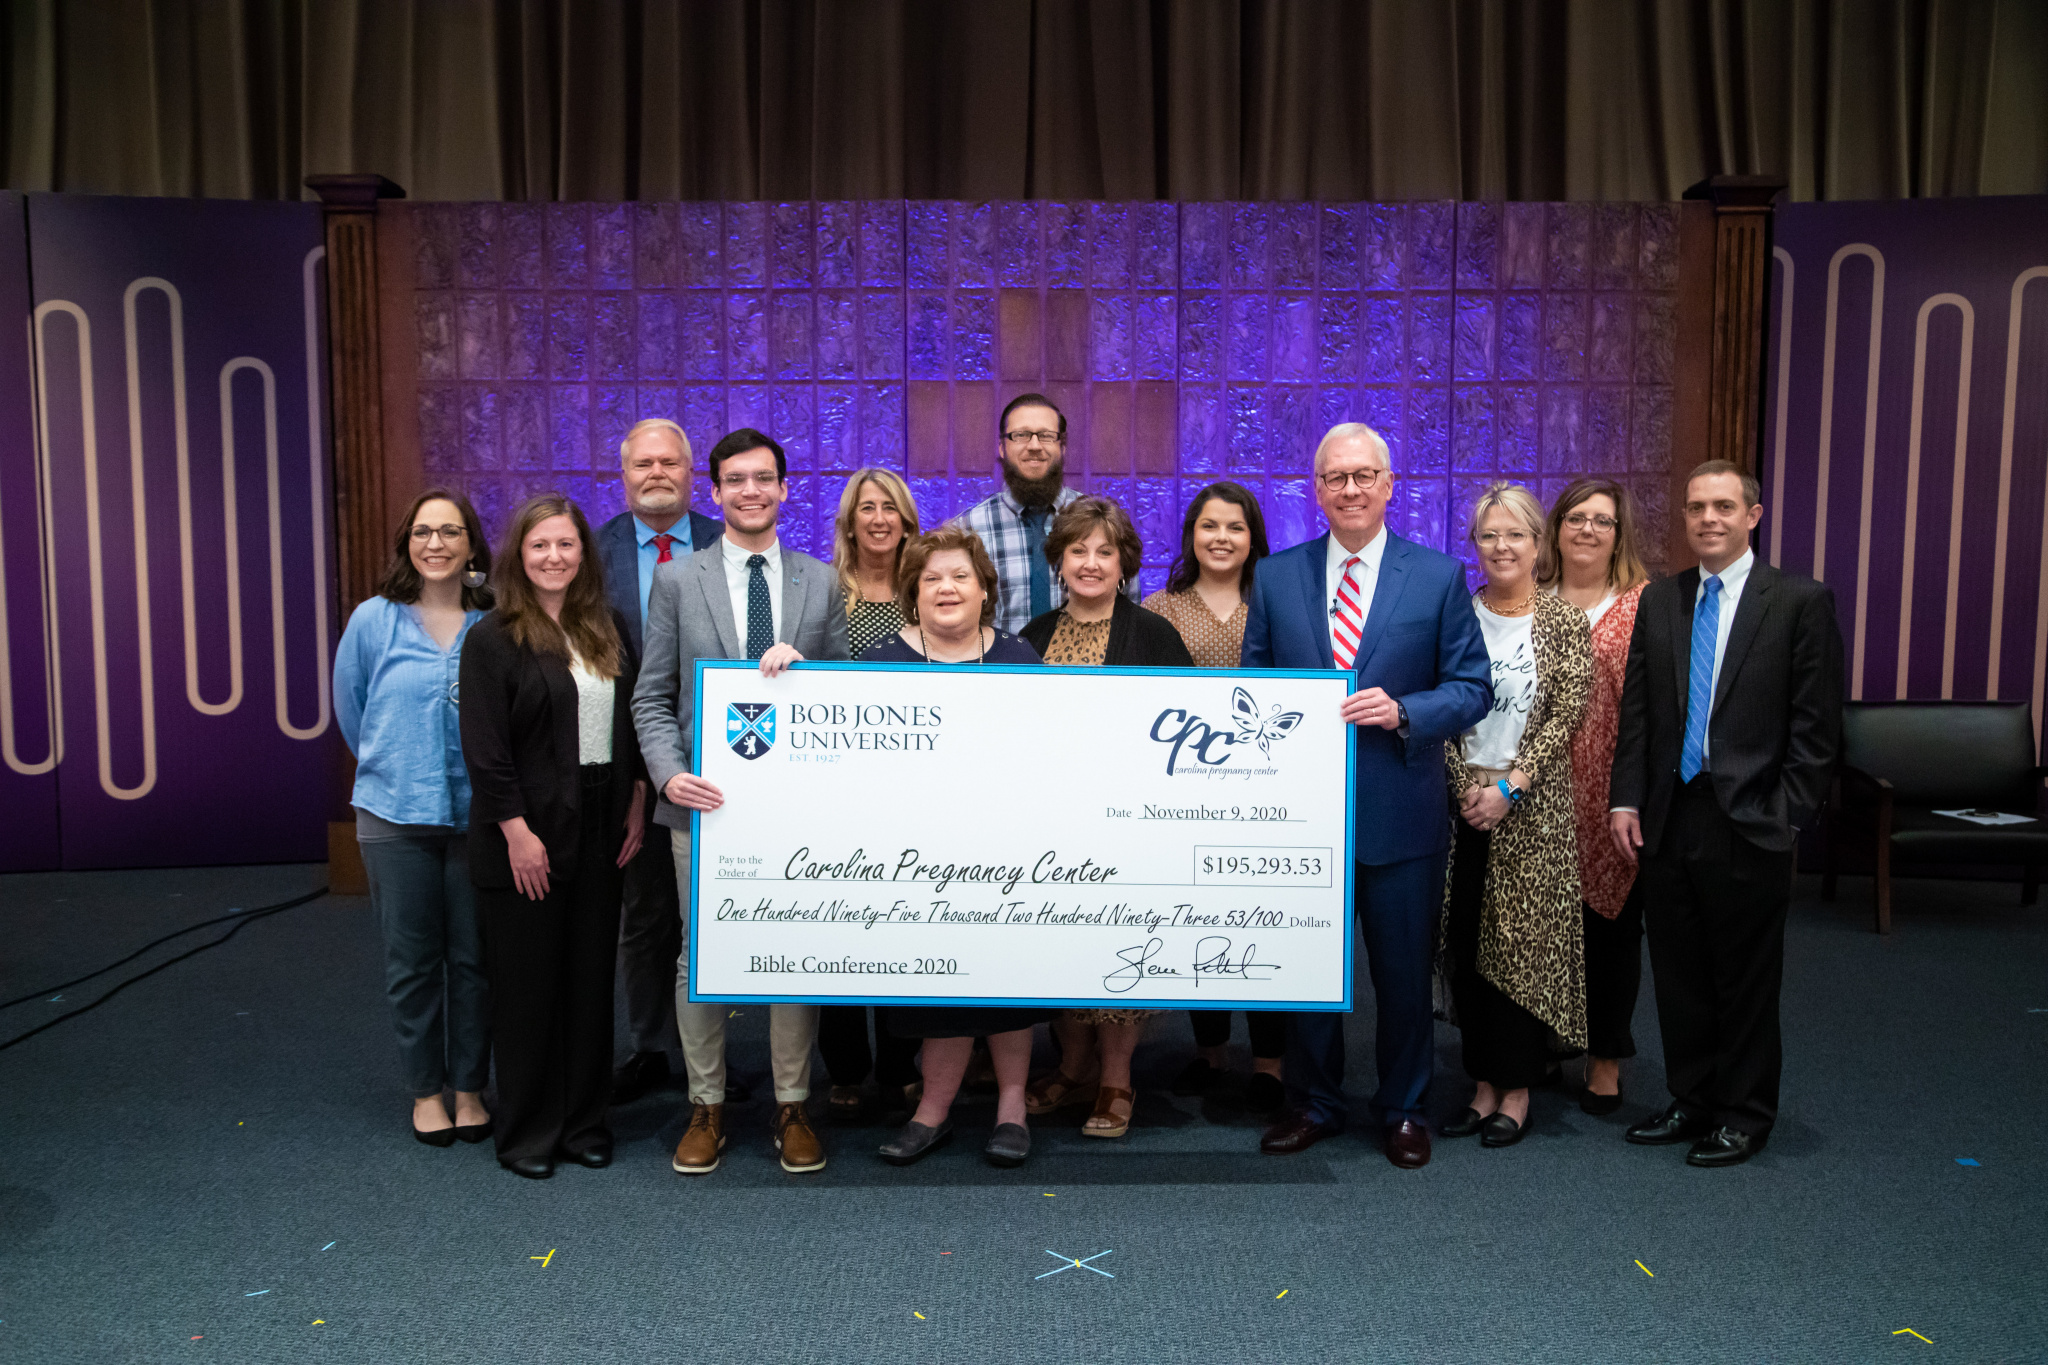 Carolina Pregnancy Center is presented with donation check